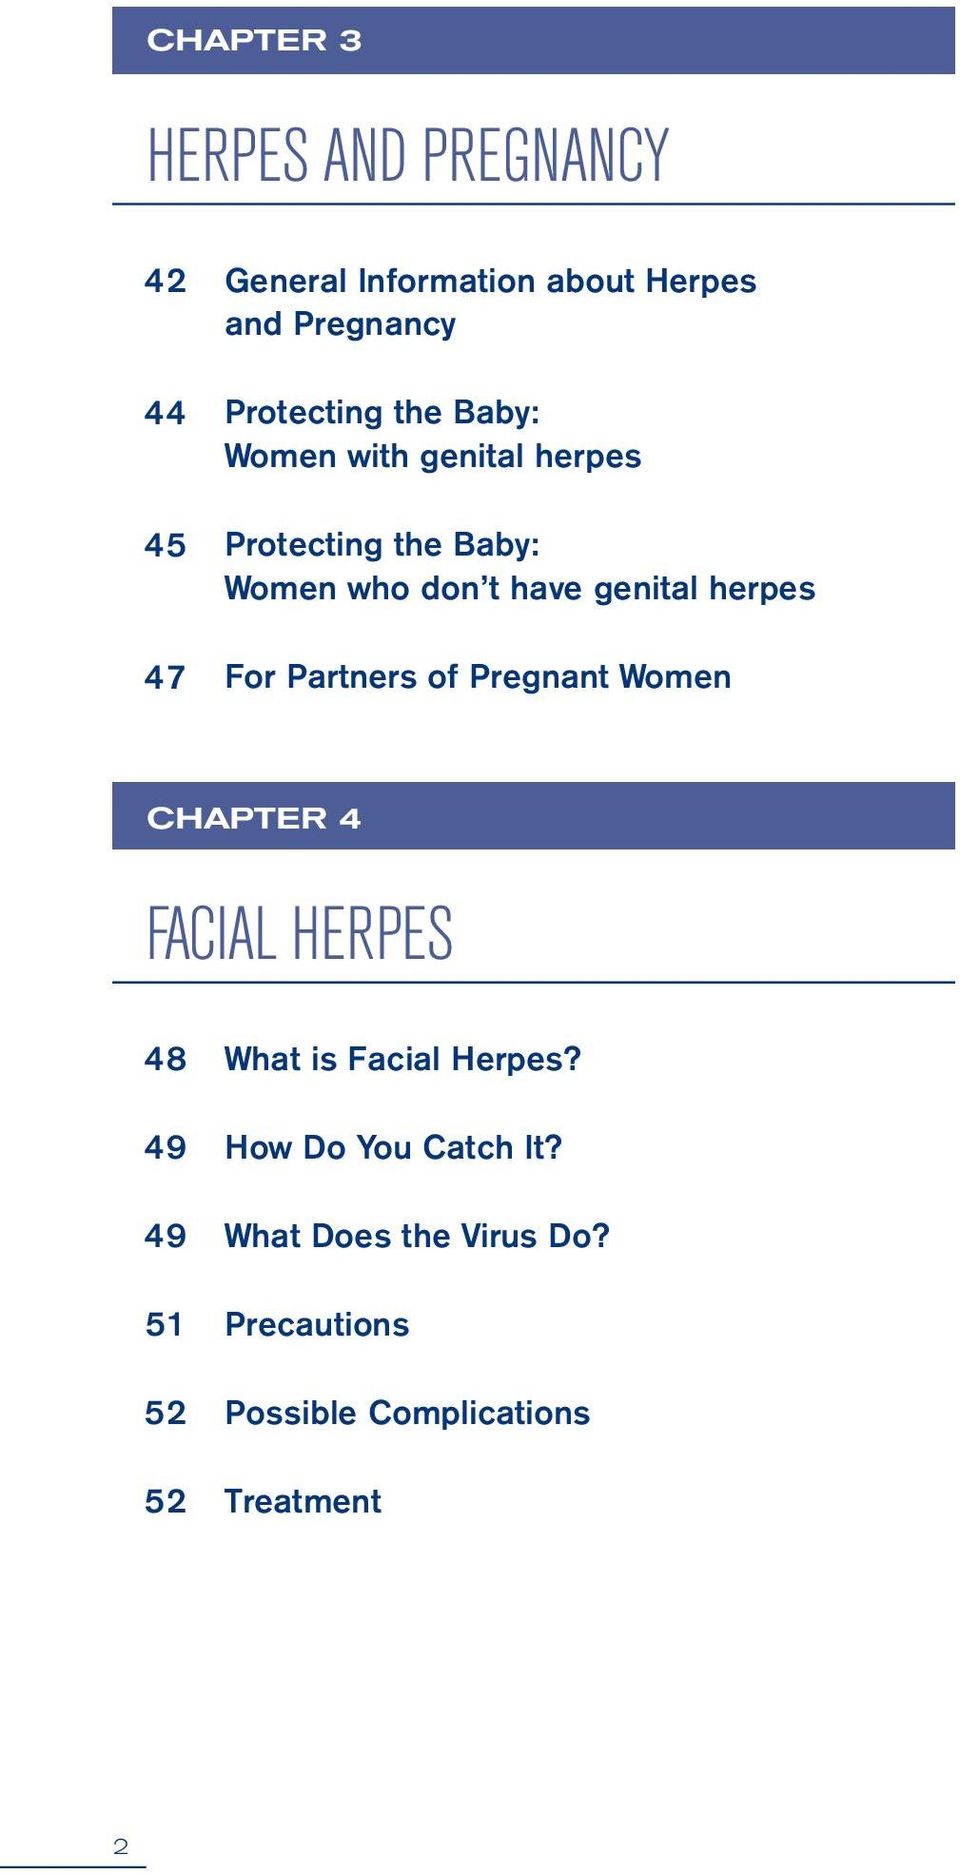 Herpes facts for partners